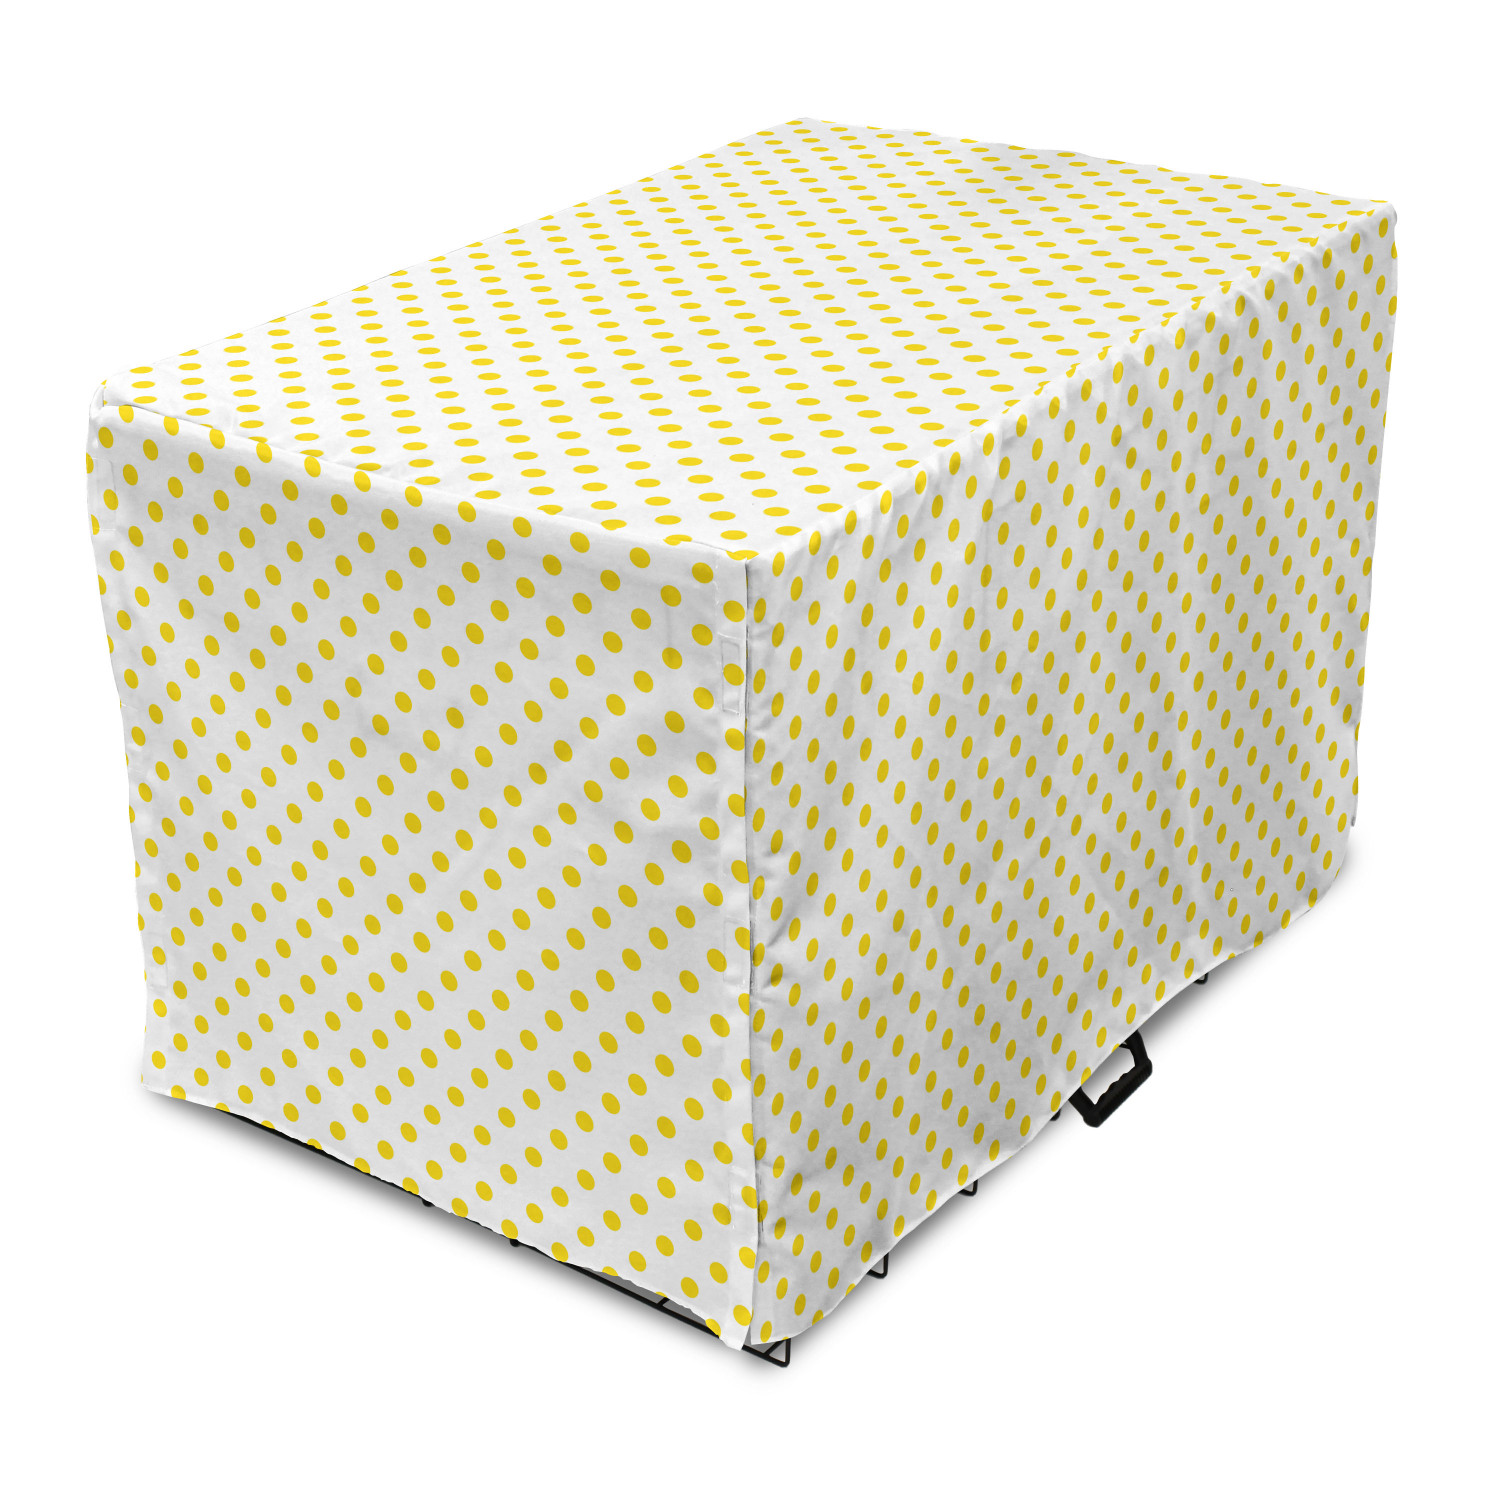 Yellow Dog Crate Cover, Picnic Like 50s 60s 70s Retro Themed Yellow Spotted White Pattern Print, Easy to Use Pet Kennel Cover for Medium Large Dogs, 35" x 23" x 27", Yellow and White, by Ambesonne - image 1 of 6